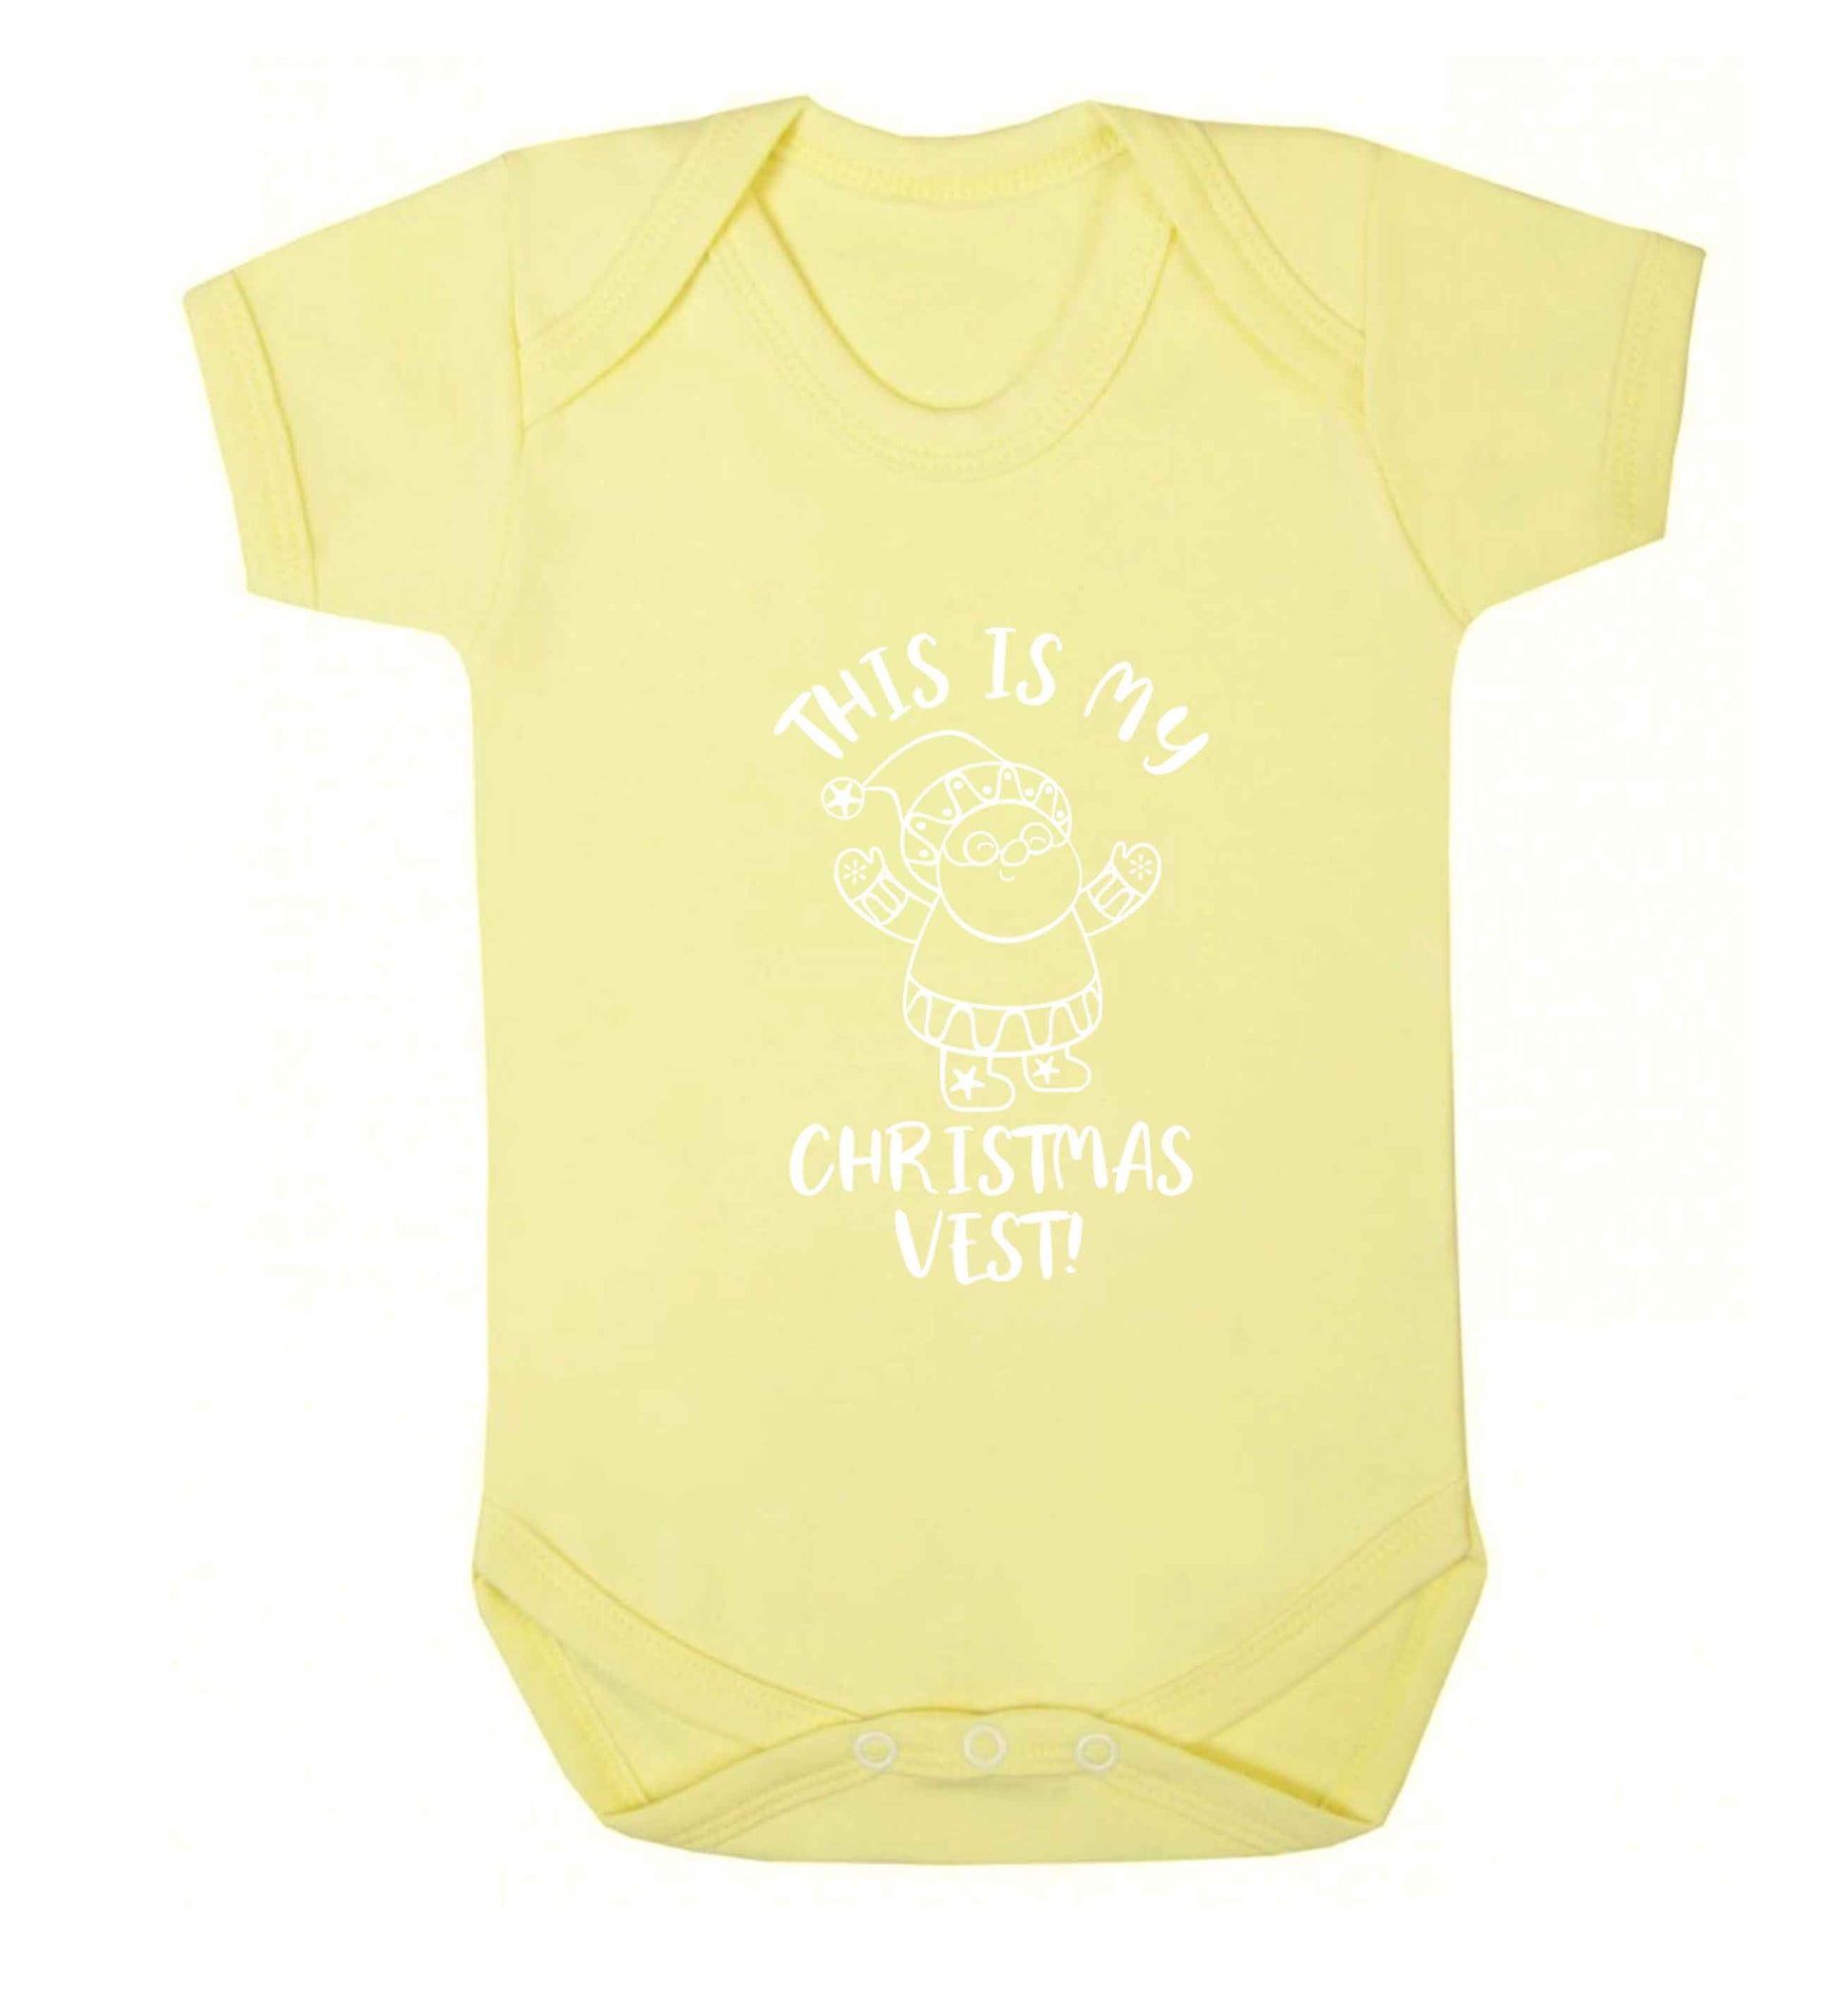 This is my Christmas vest Baby Vest pale yellow 18-24 months